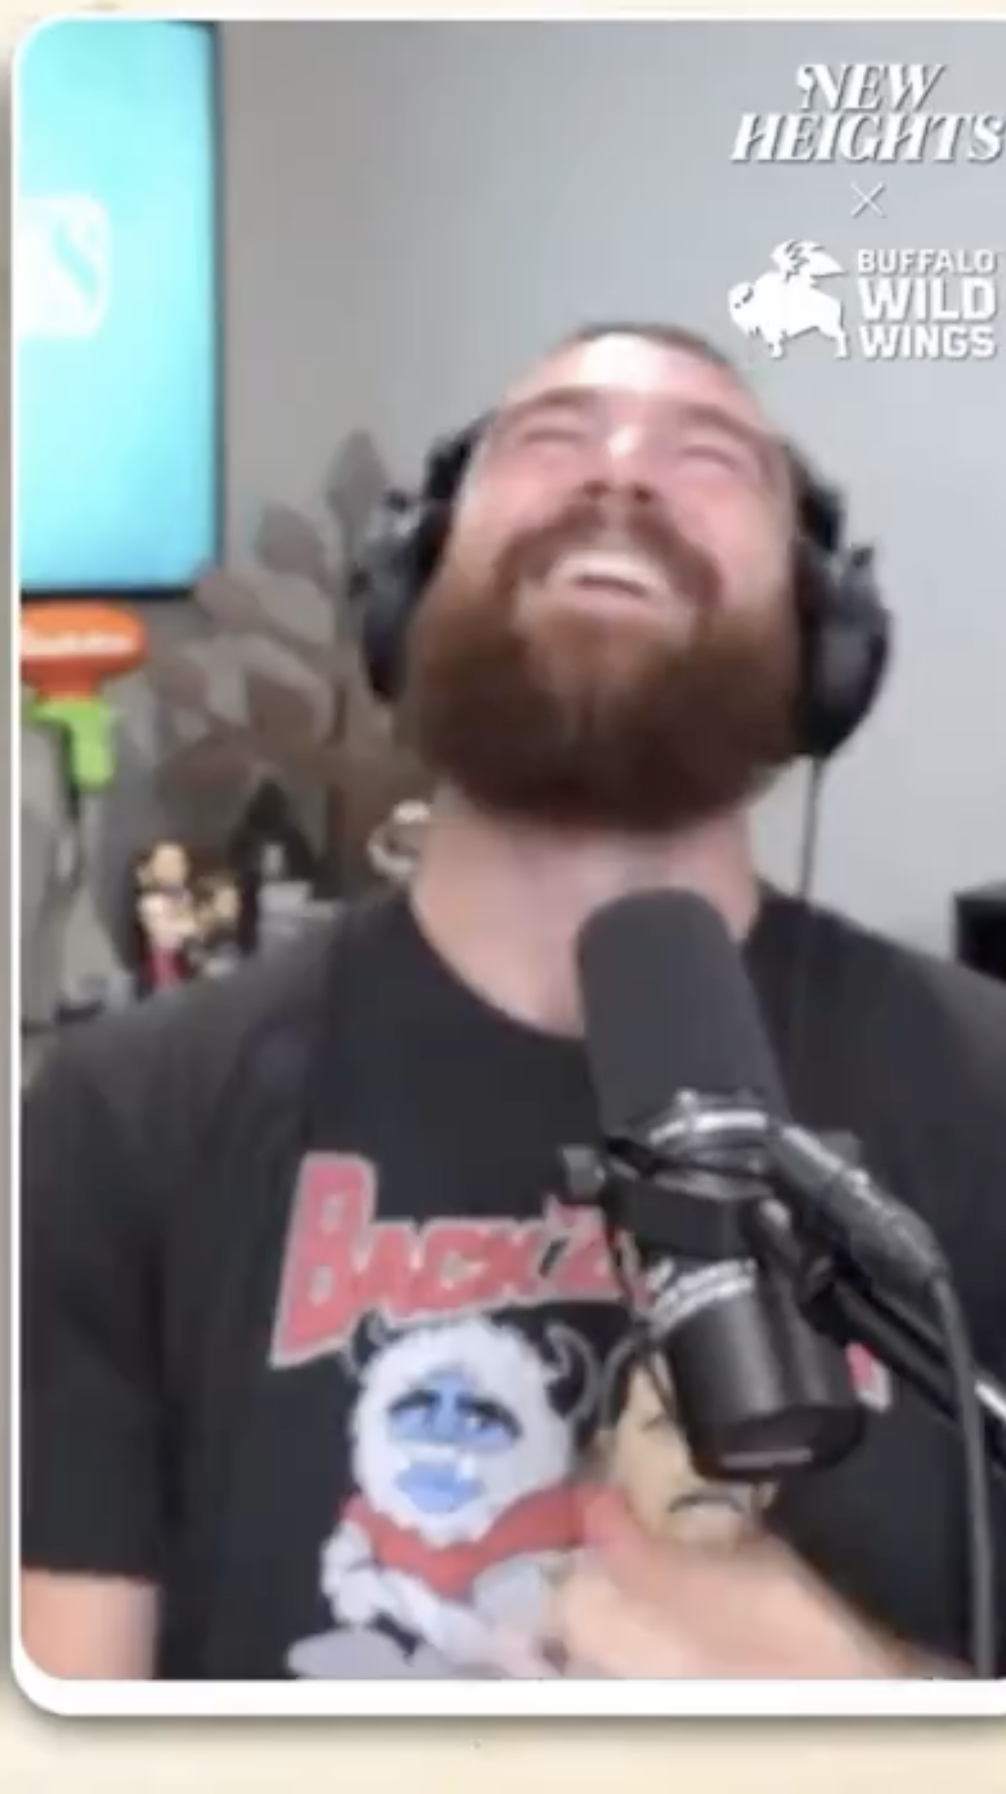 Travis, in a graphic T-shirt and wearing headphones, laughing in front of a microphone in a room with toys in the background